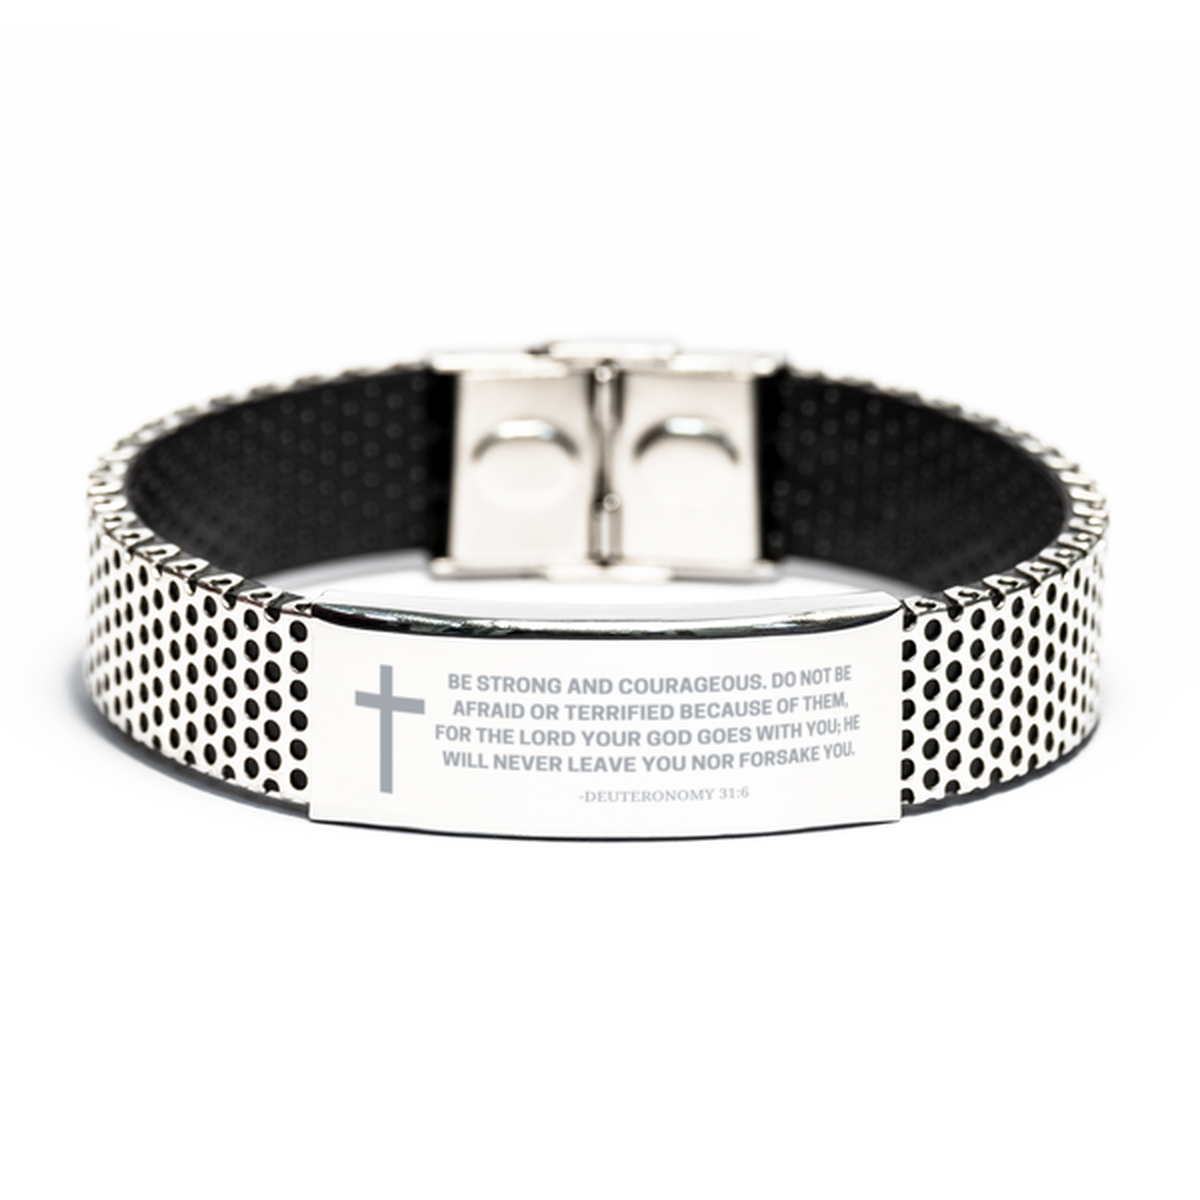 Baptism Gifts For Teenage Boys Girls, Christian Bible Verse Stainless Steel Bracelet, He will never leave you nor forsake you, Catholic Confirmation Gifts for Son, Godson, Grandson, Nephew